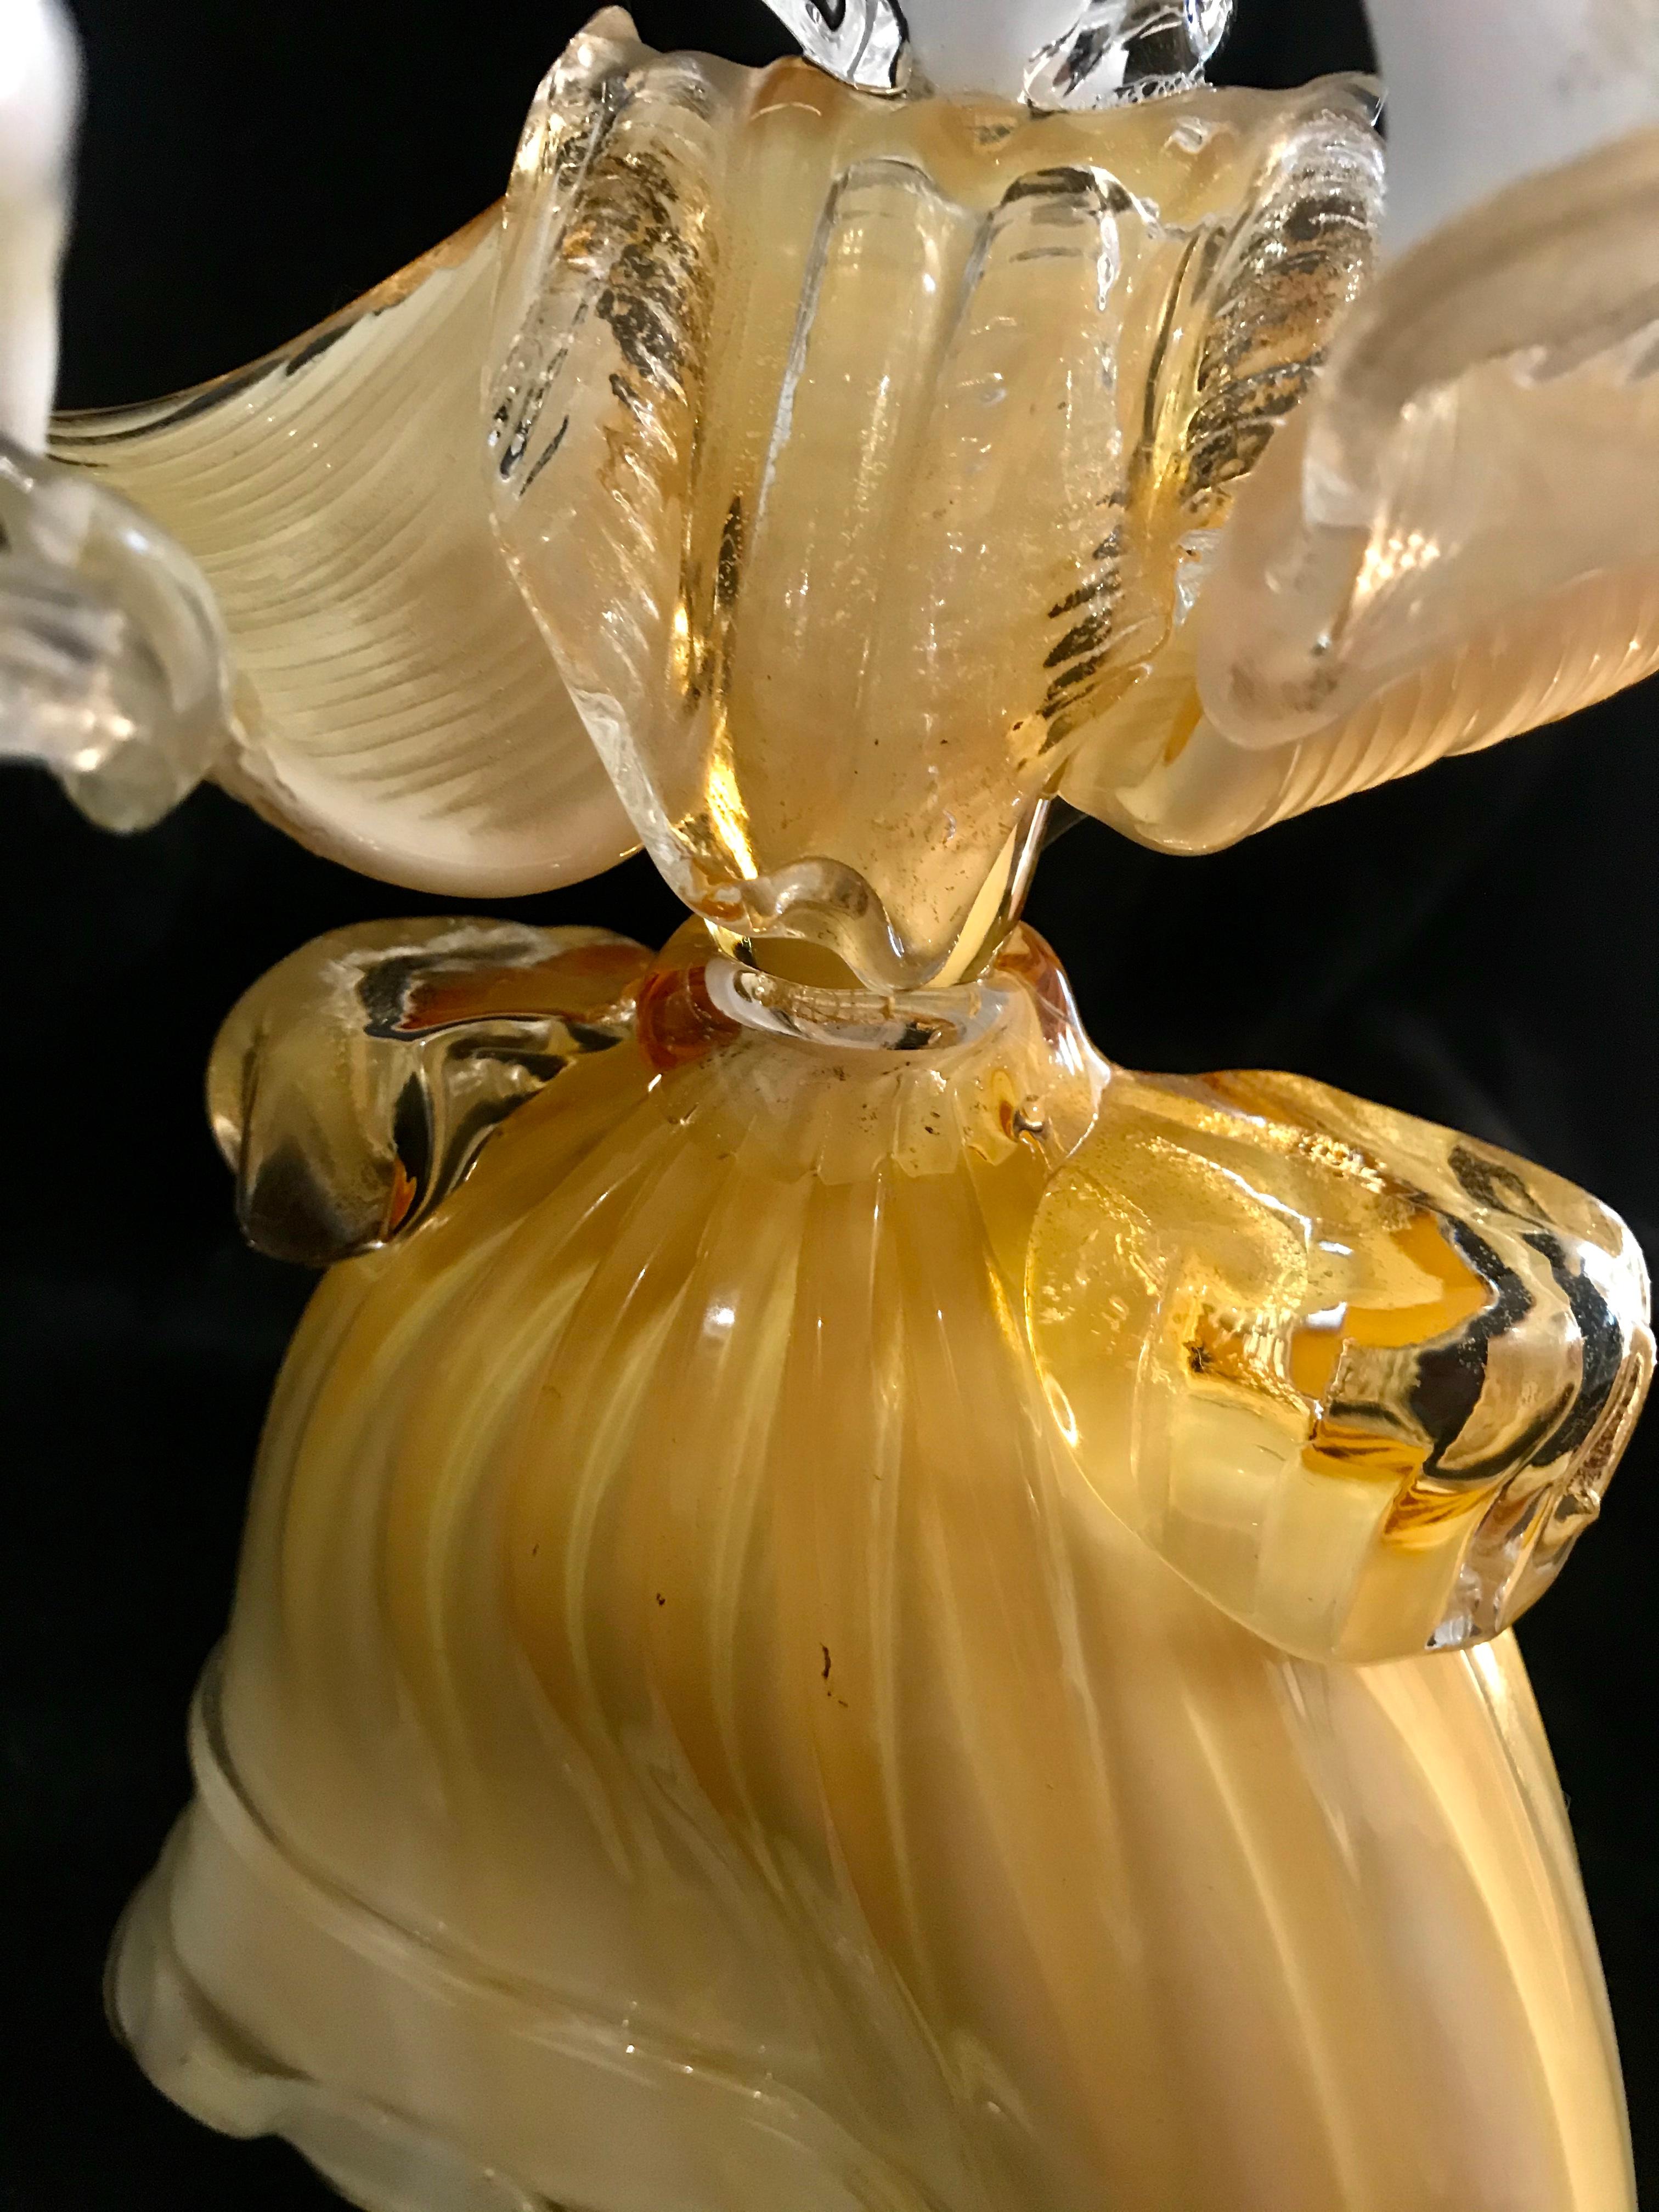 Exceptional Seguso venitian couple  with incrustation gold glass Murano. The Design and the quality of the glass make this piece the best of the Italian Design.
This unique Seguso dancer in gold glass murano are exceptional.

discount shipping